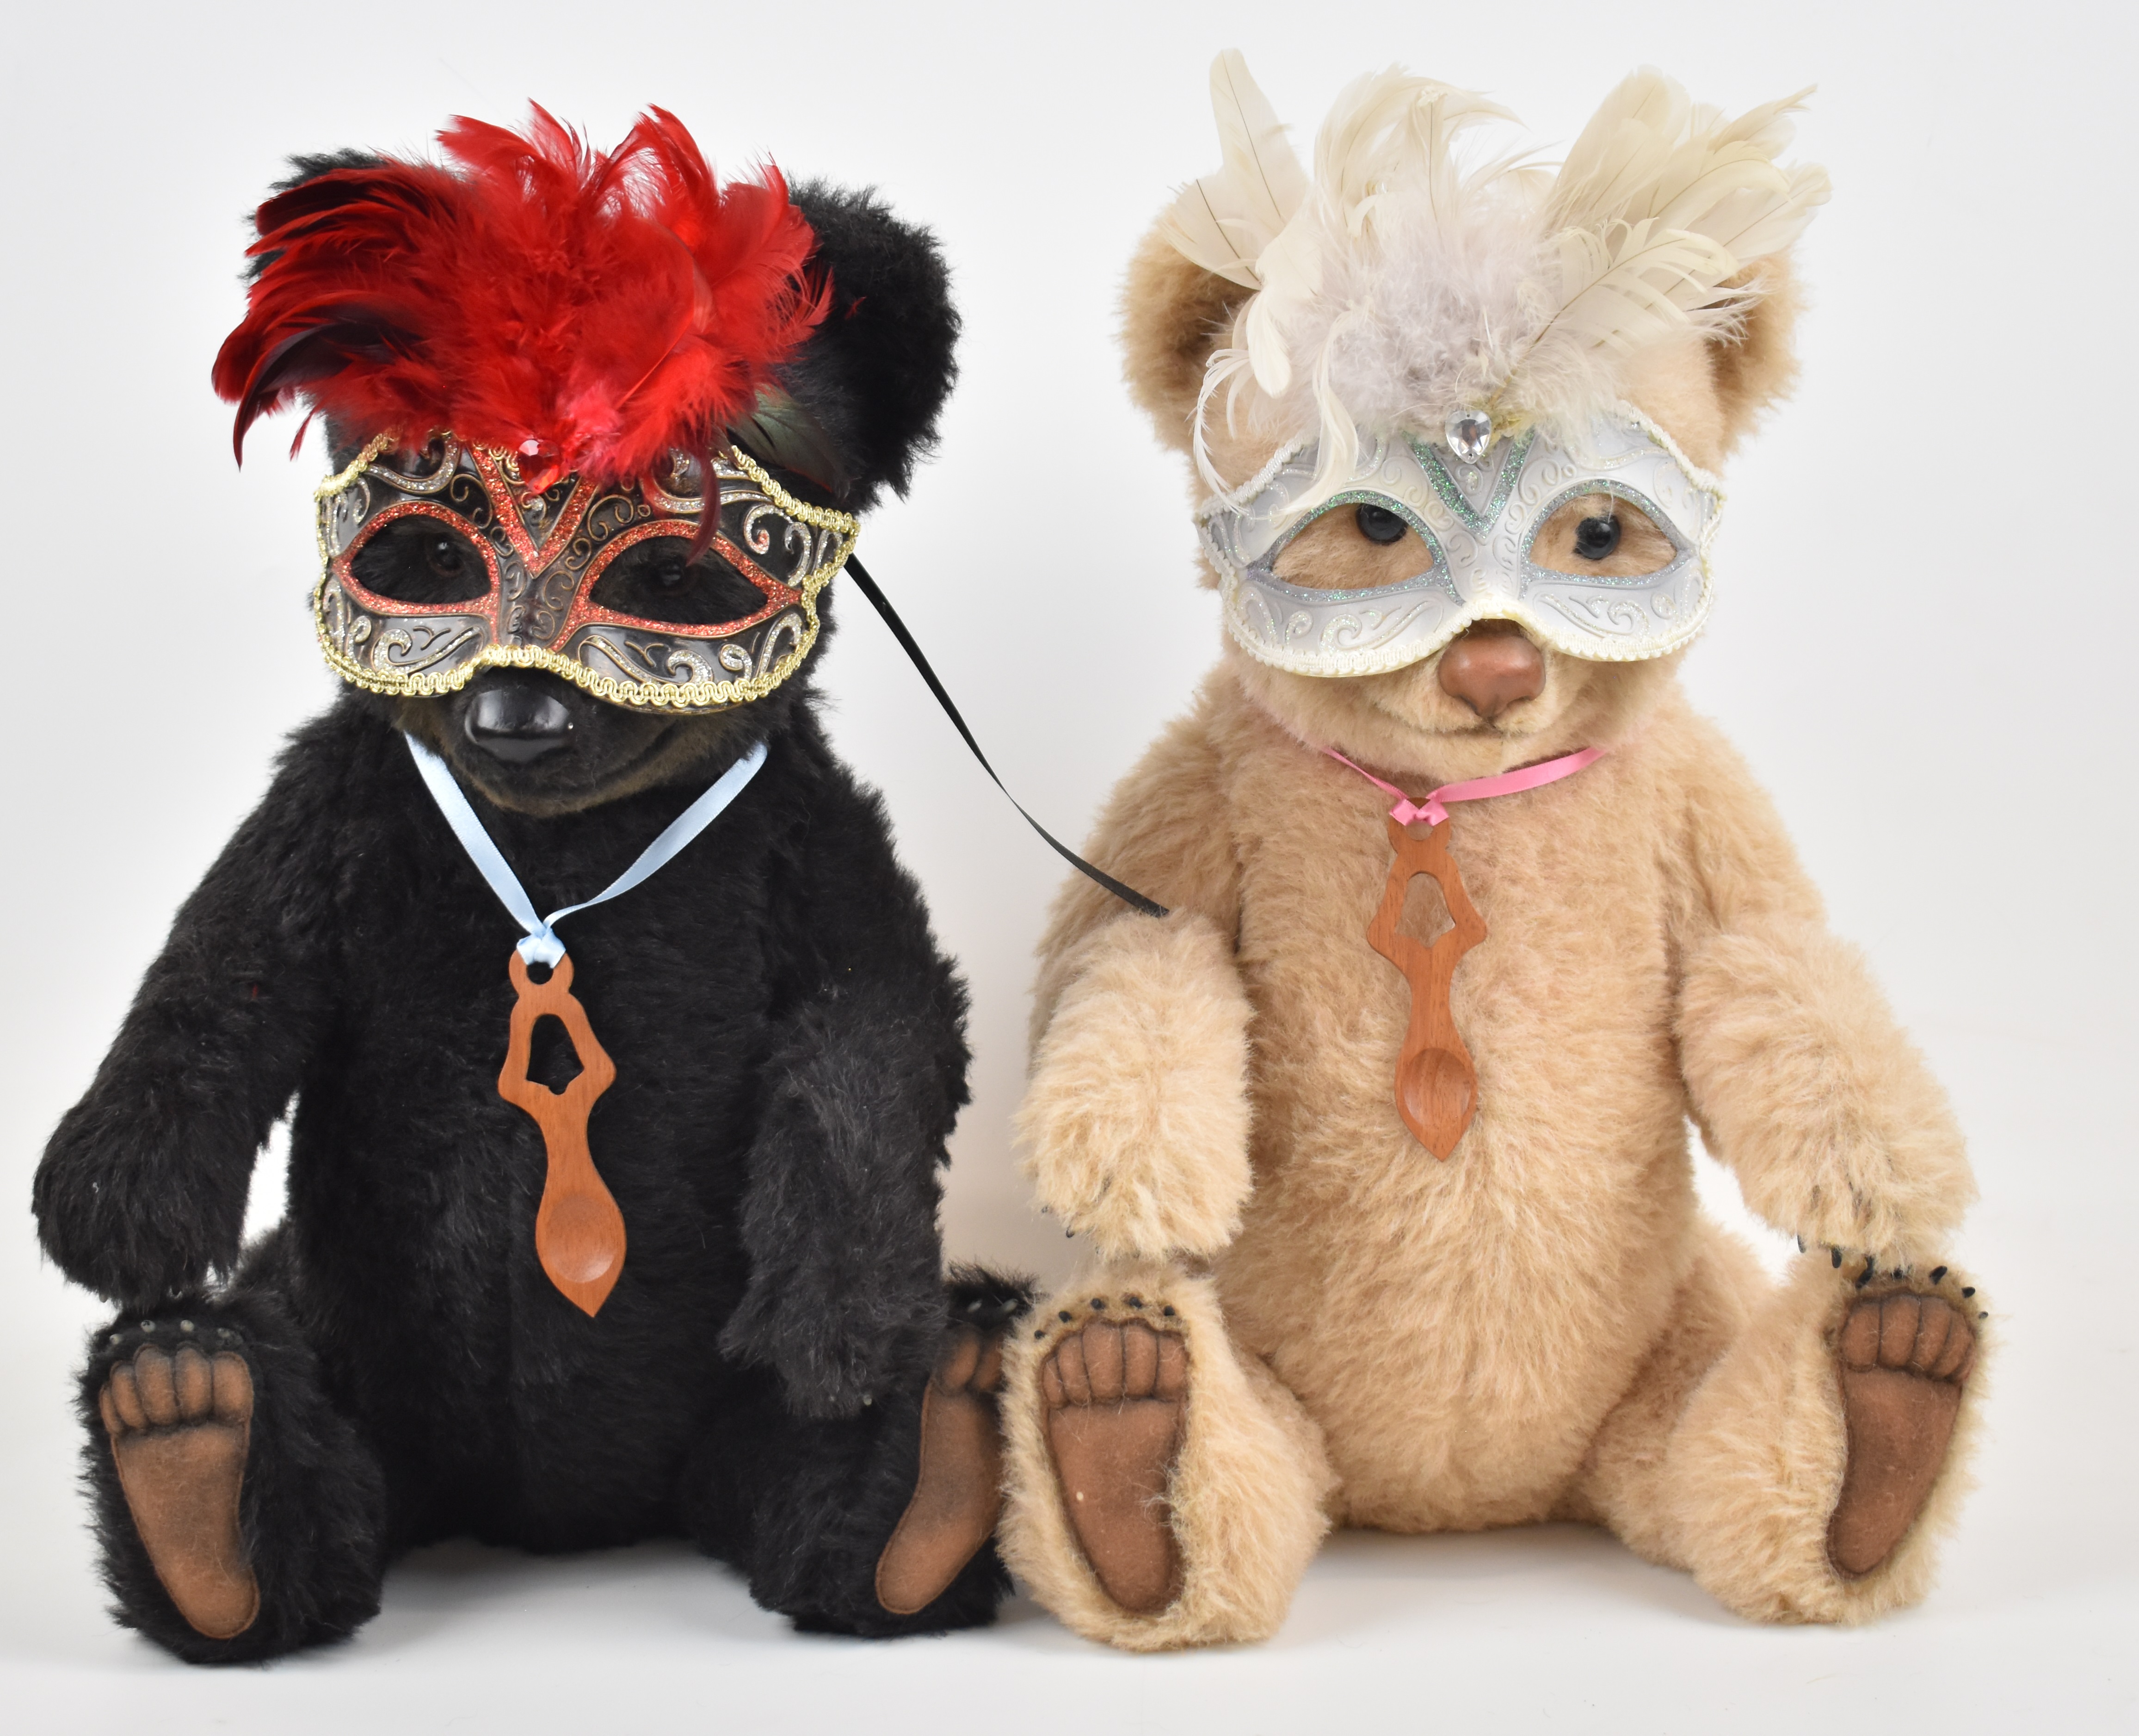 Two R. John Wright limited edition Teddy bears Duncan and Fiona, each with original tags and